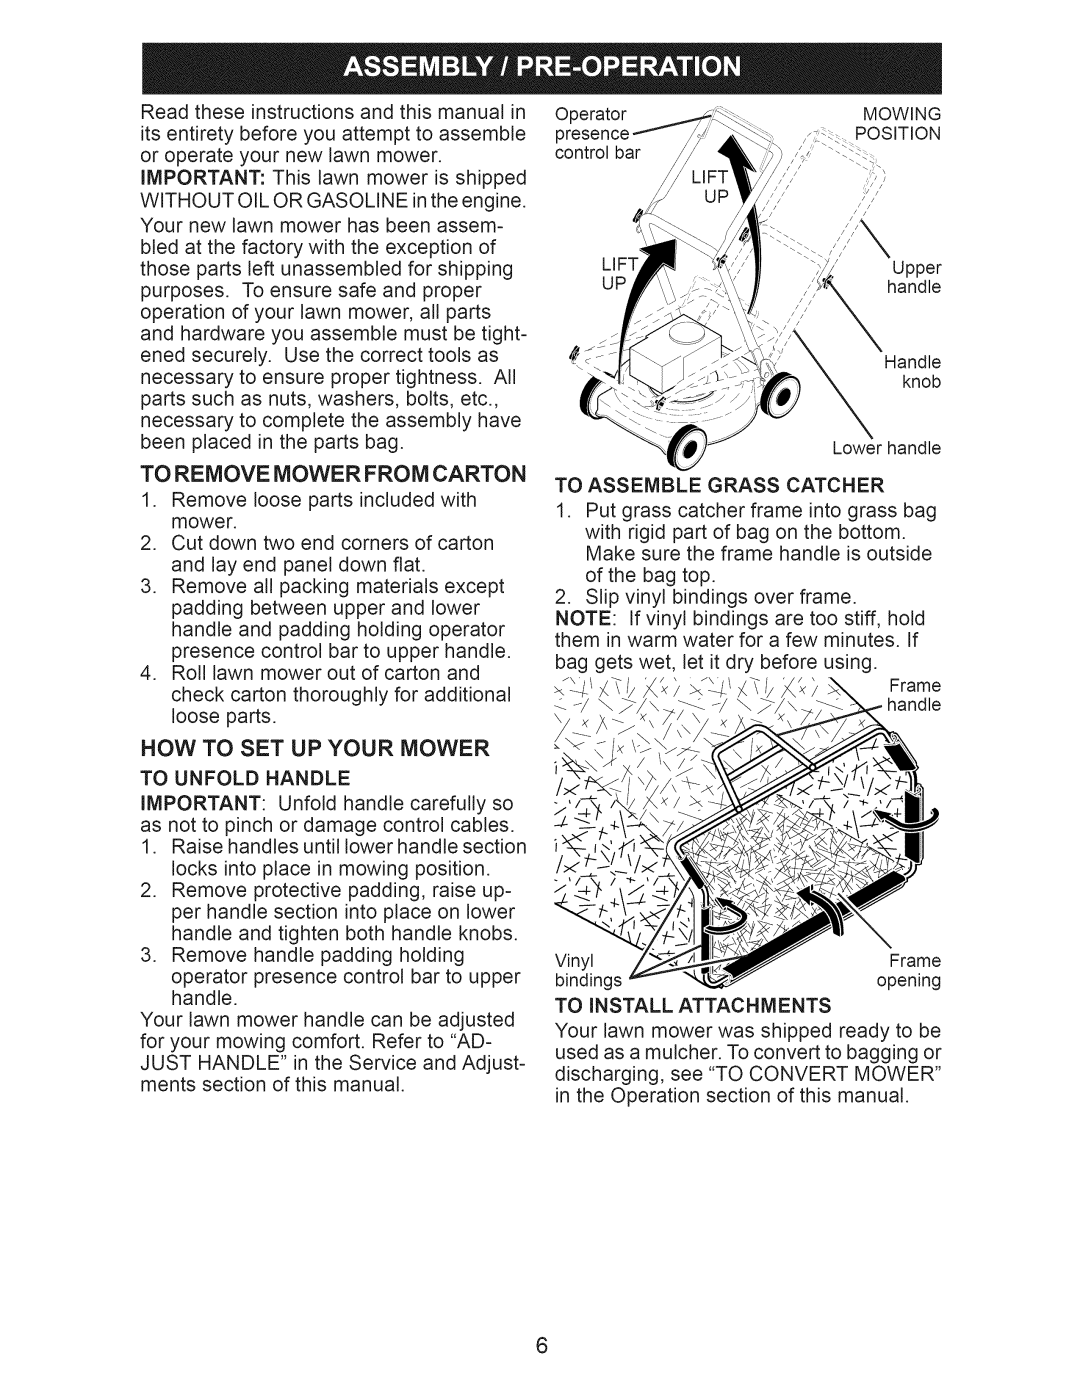 Craftsman 917.388201 owner manual Now To Set Up Your Mower, To Remove Mower From Carton 